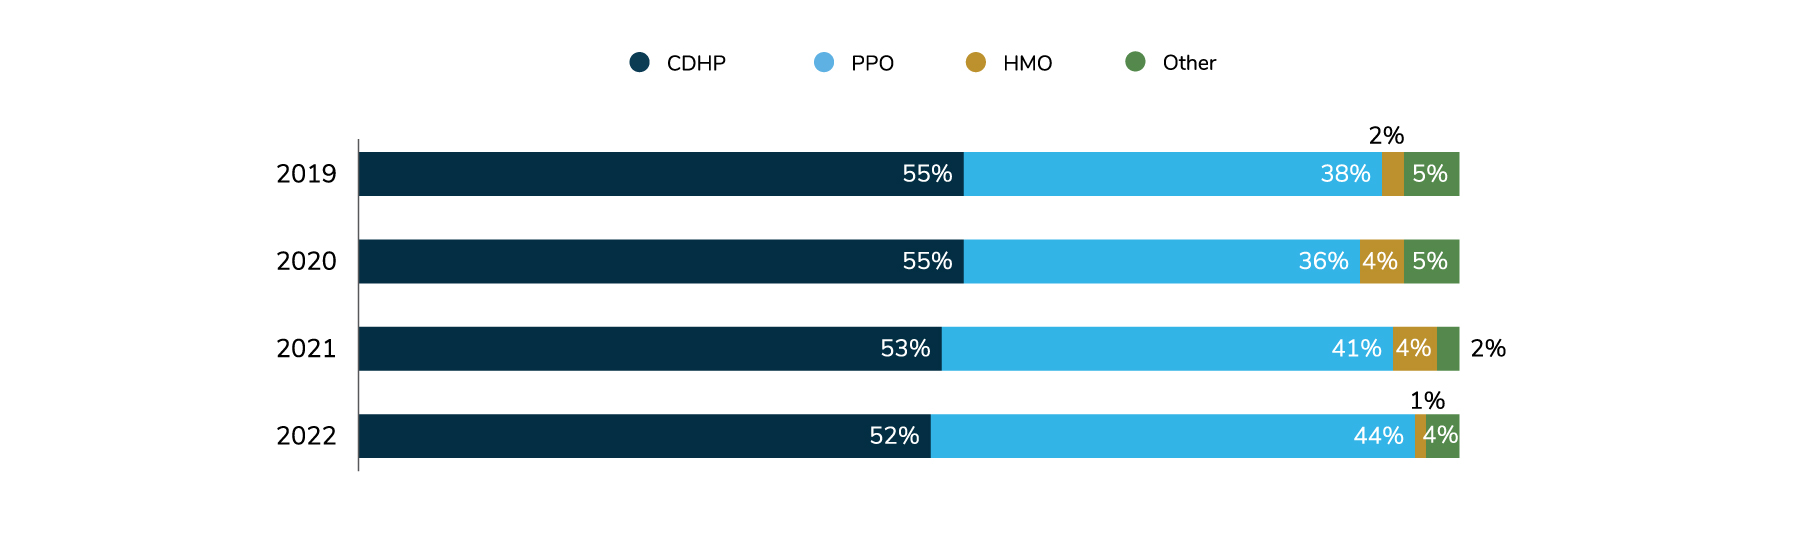 52% of employers say the plan with the highest enrollment is a CDHP, followed by PPOs (44%).